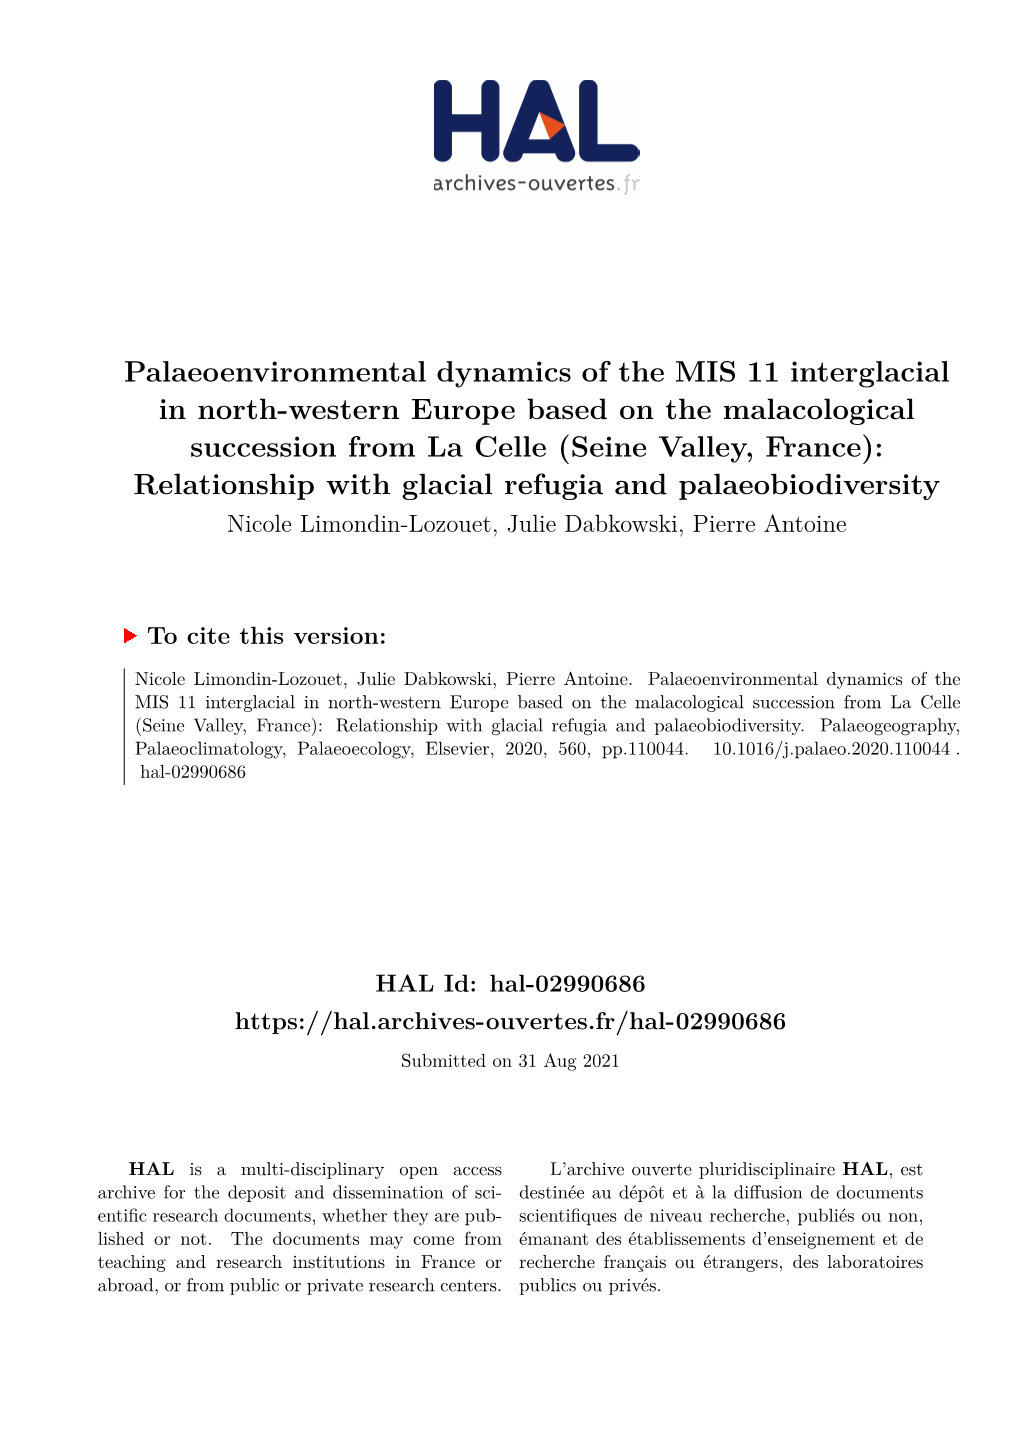 Palaeoenvironmental Dynamics of the MIS 11 Interglacial in North-Western